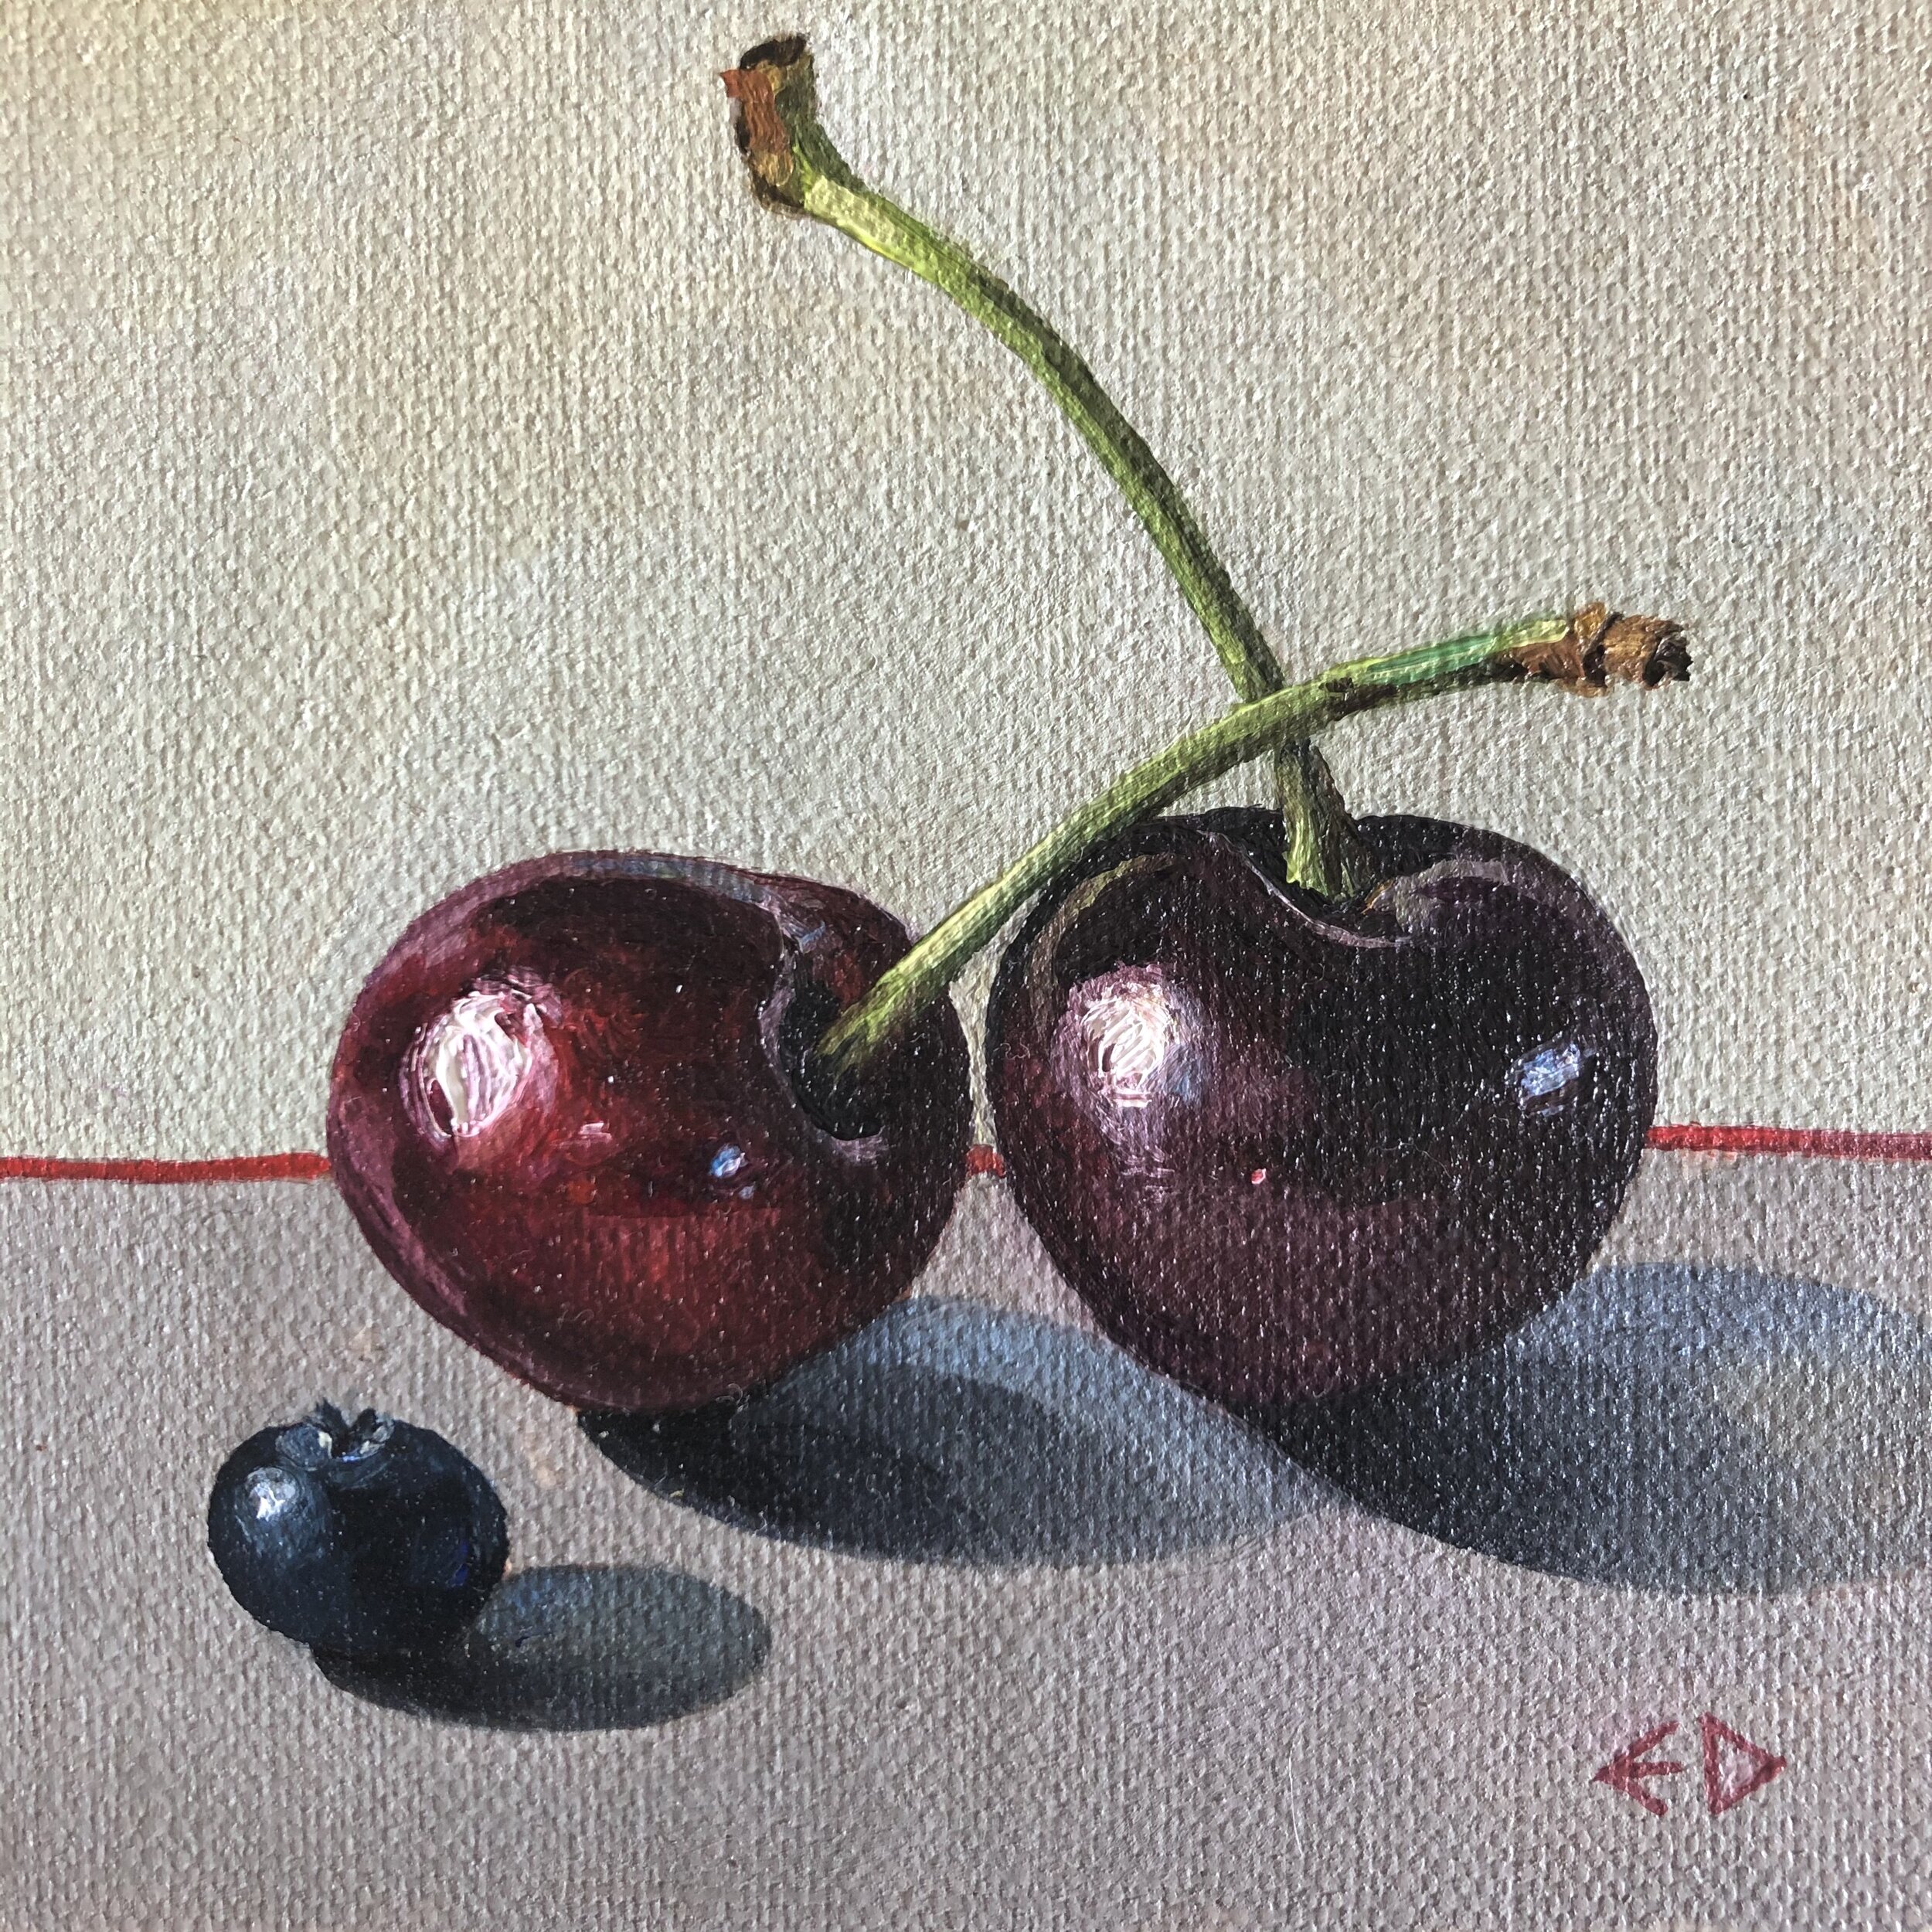 Two cherries and a blueberry